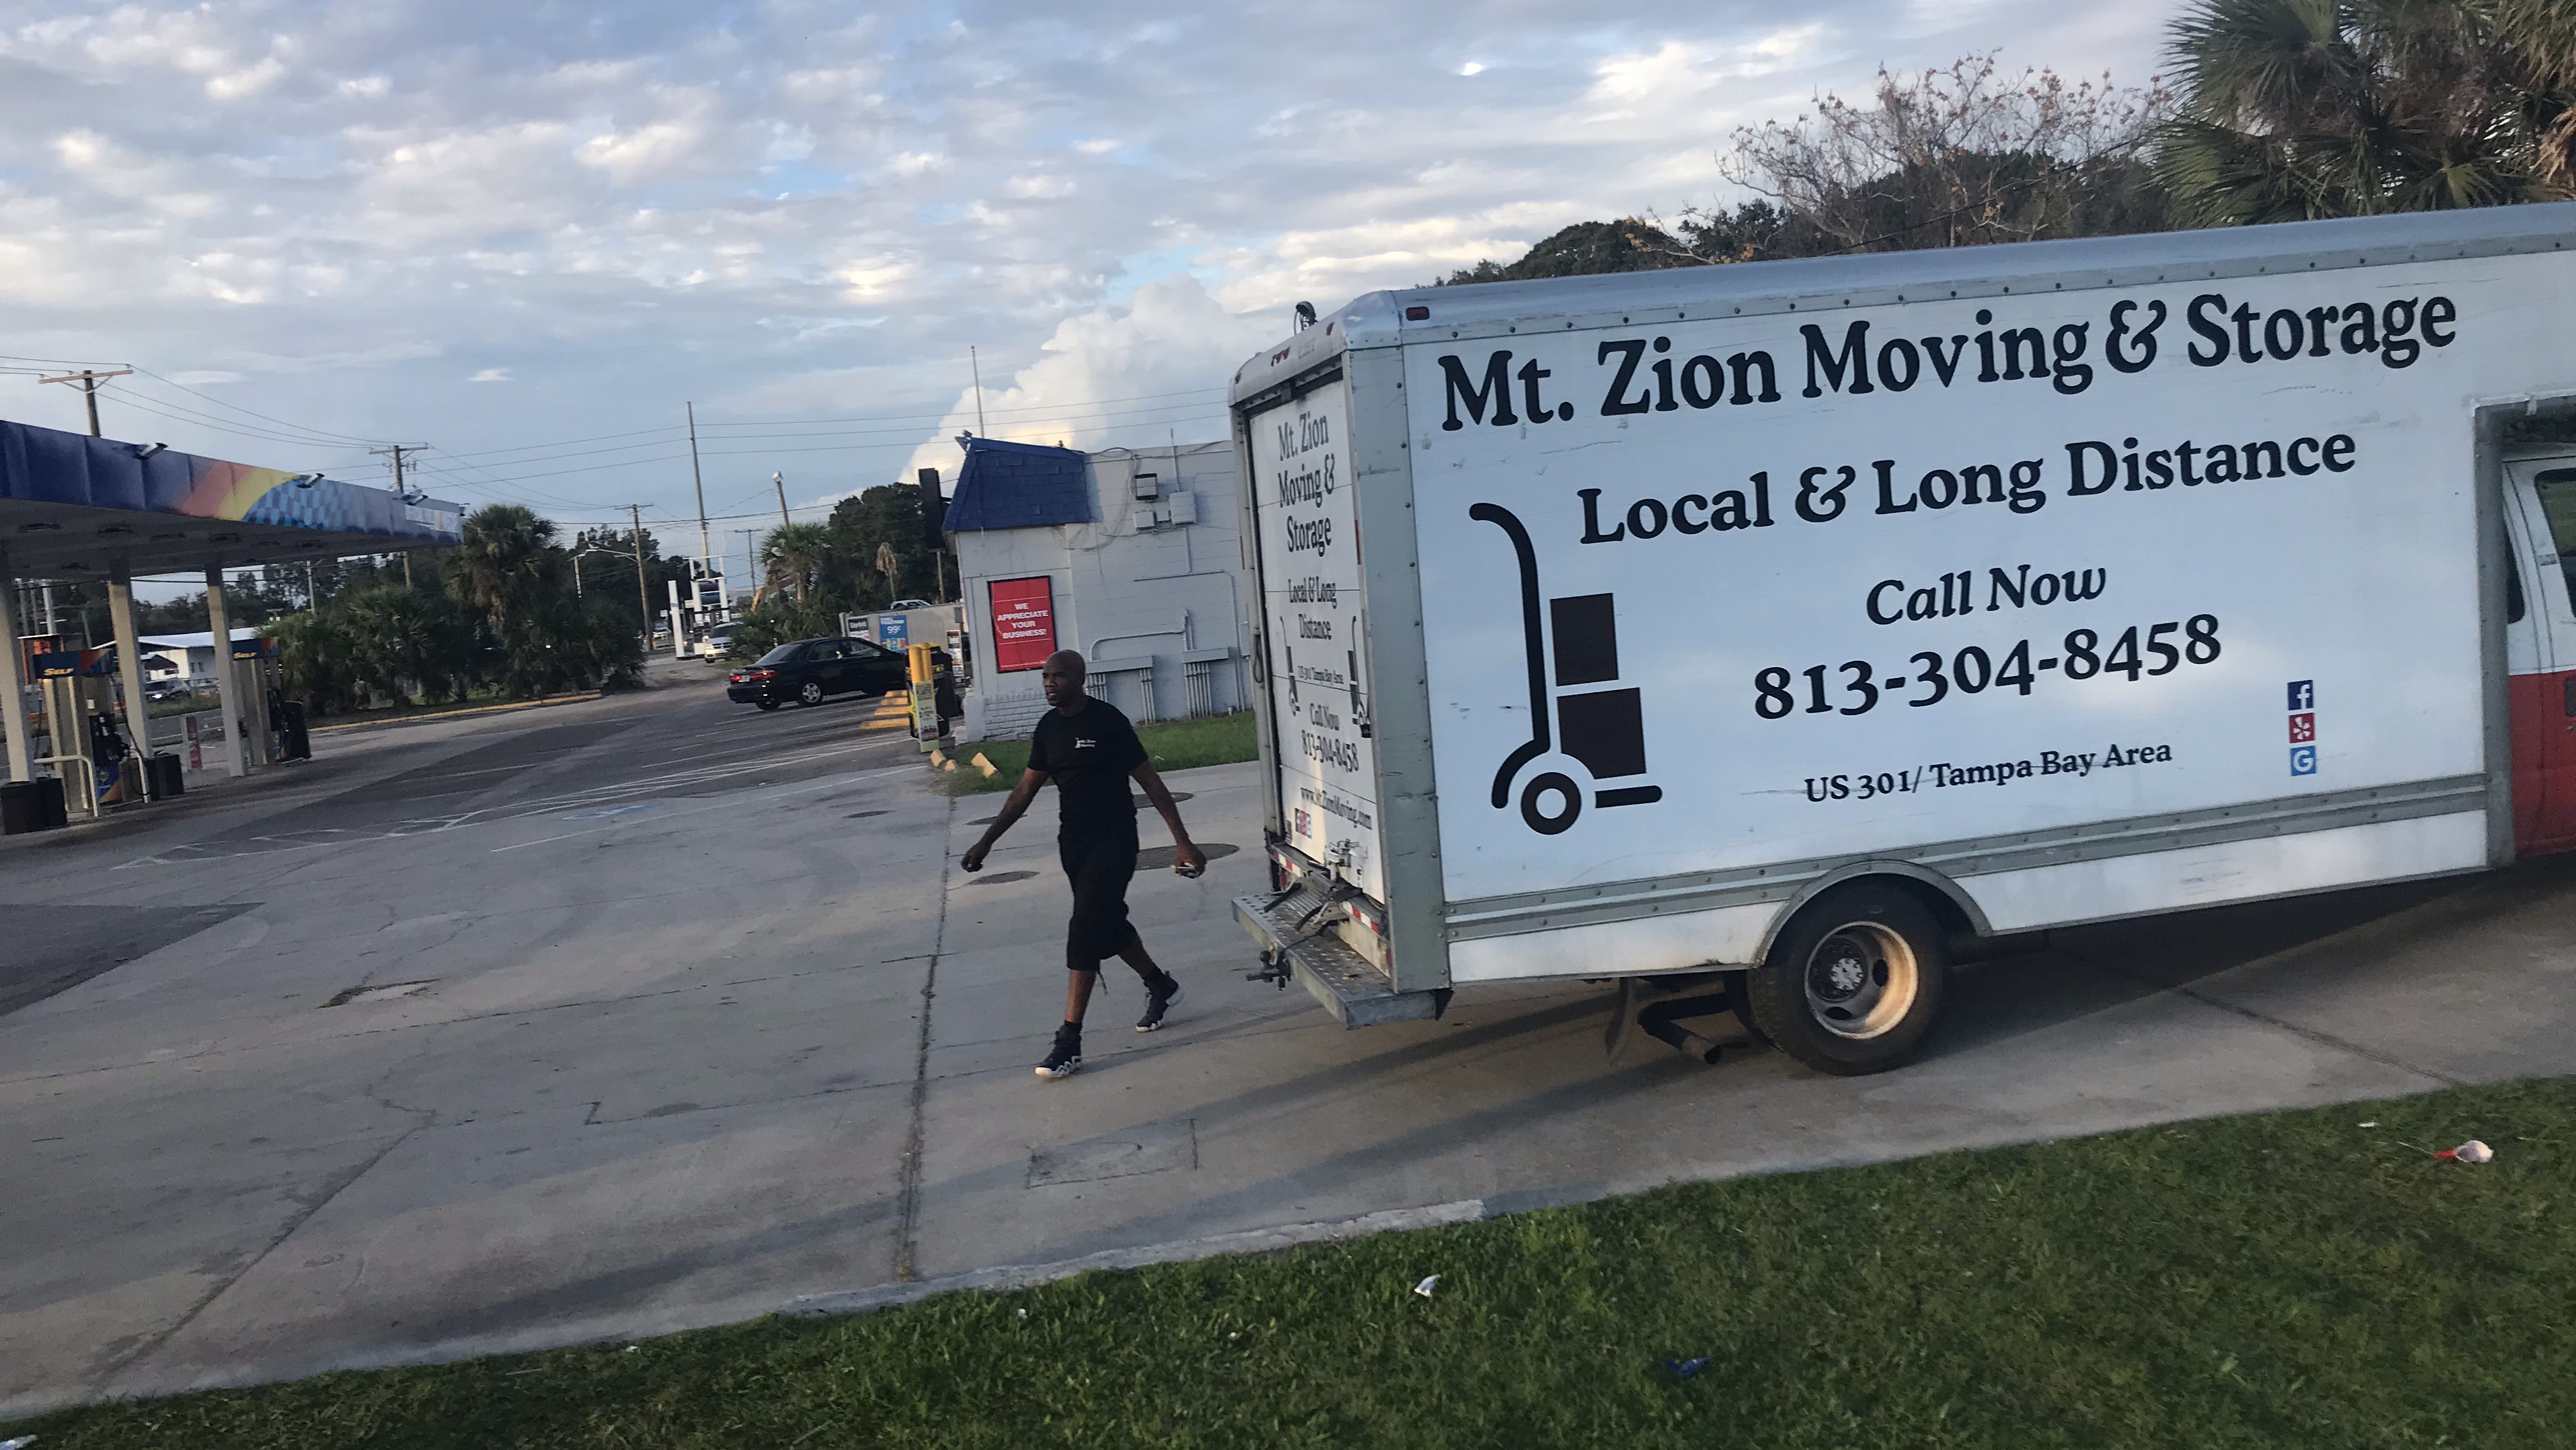 Licensed and Insured Hot Tub Movers in Avon Park, FL